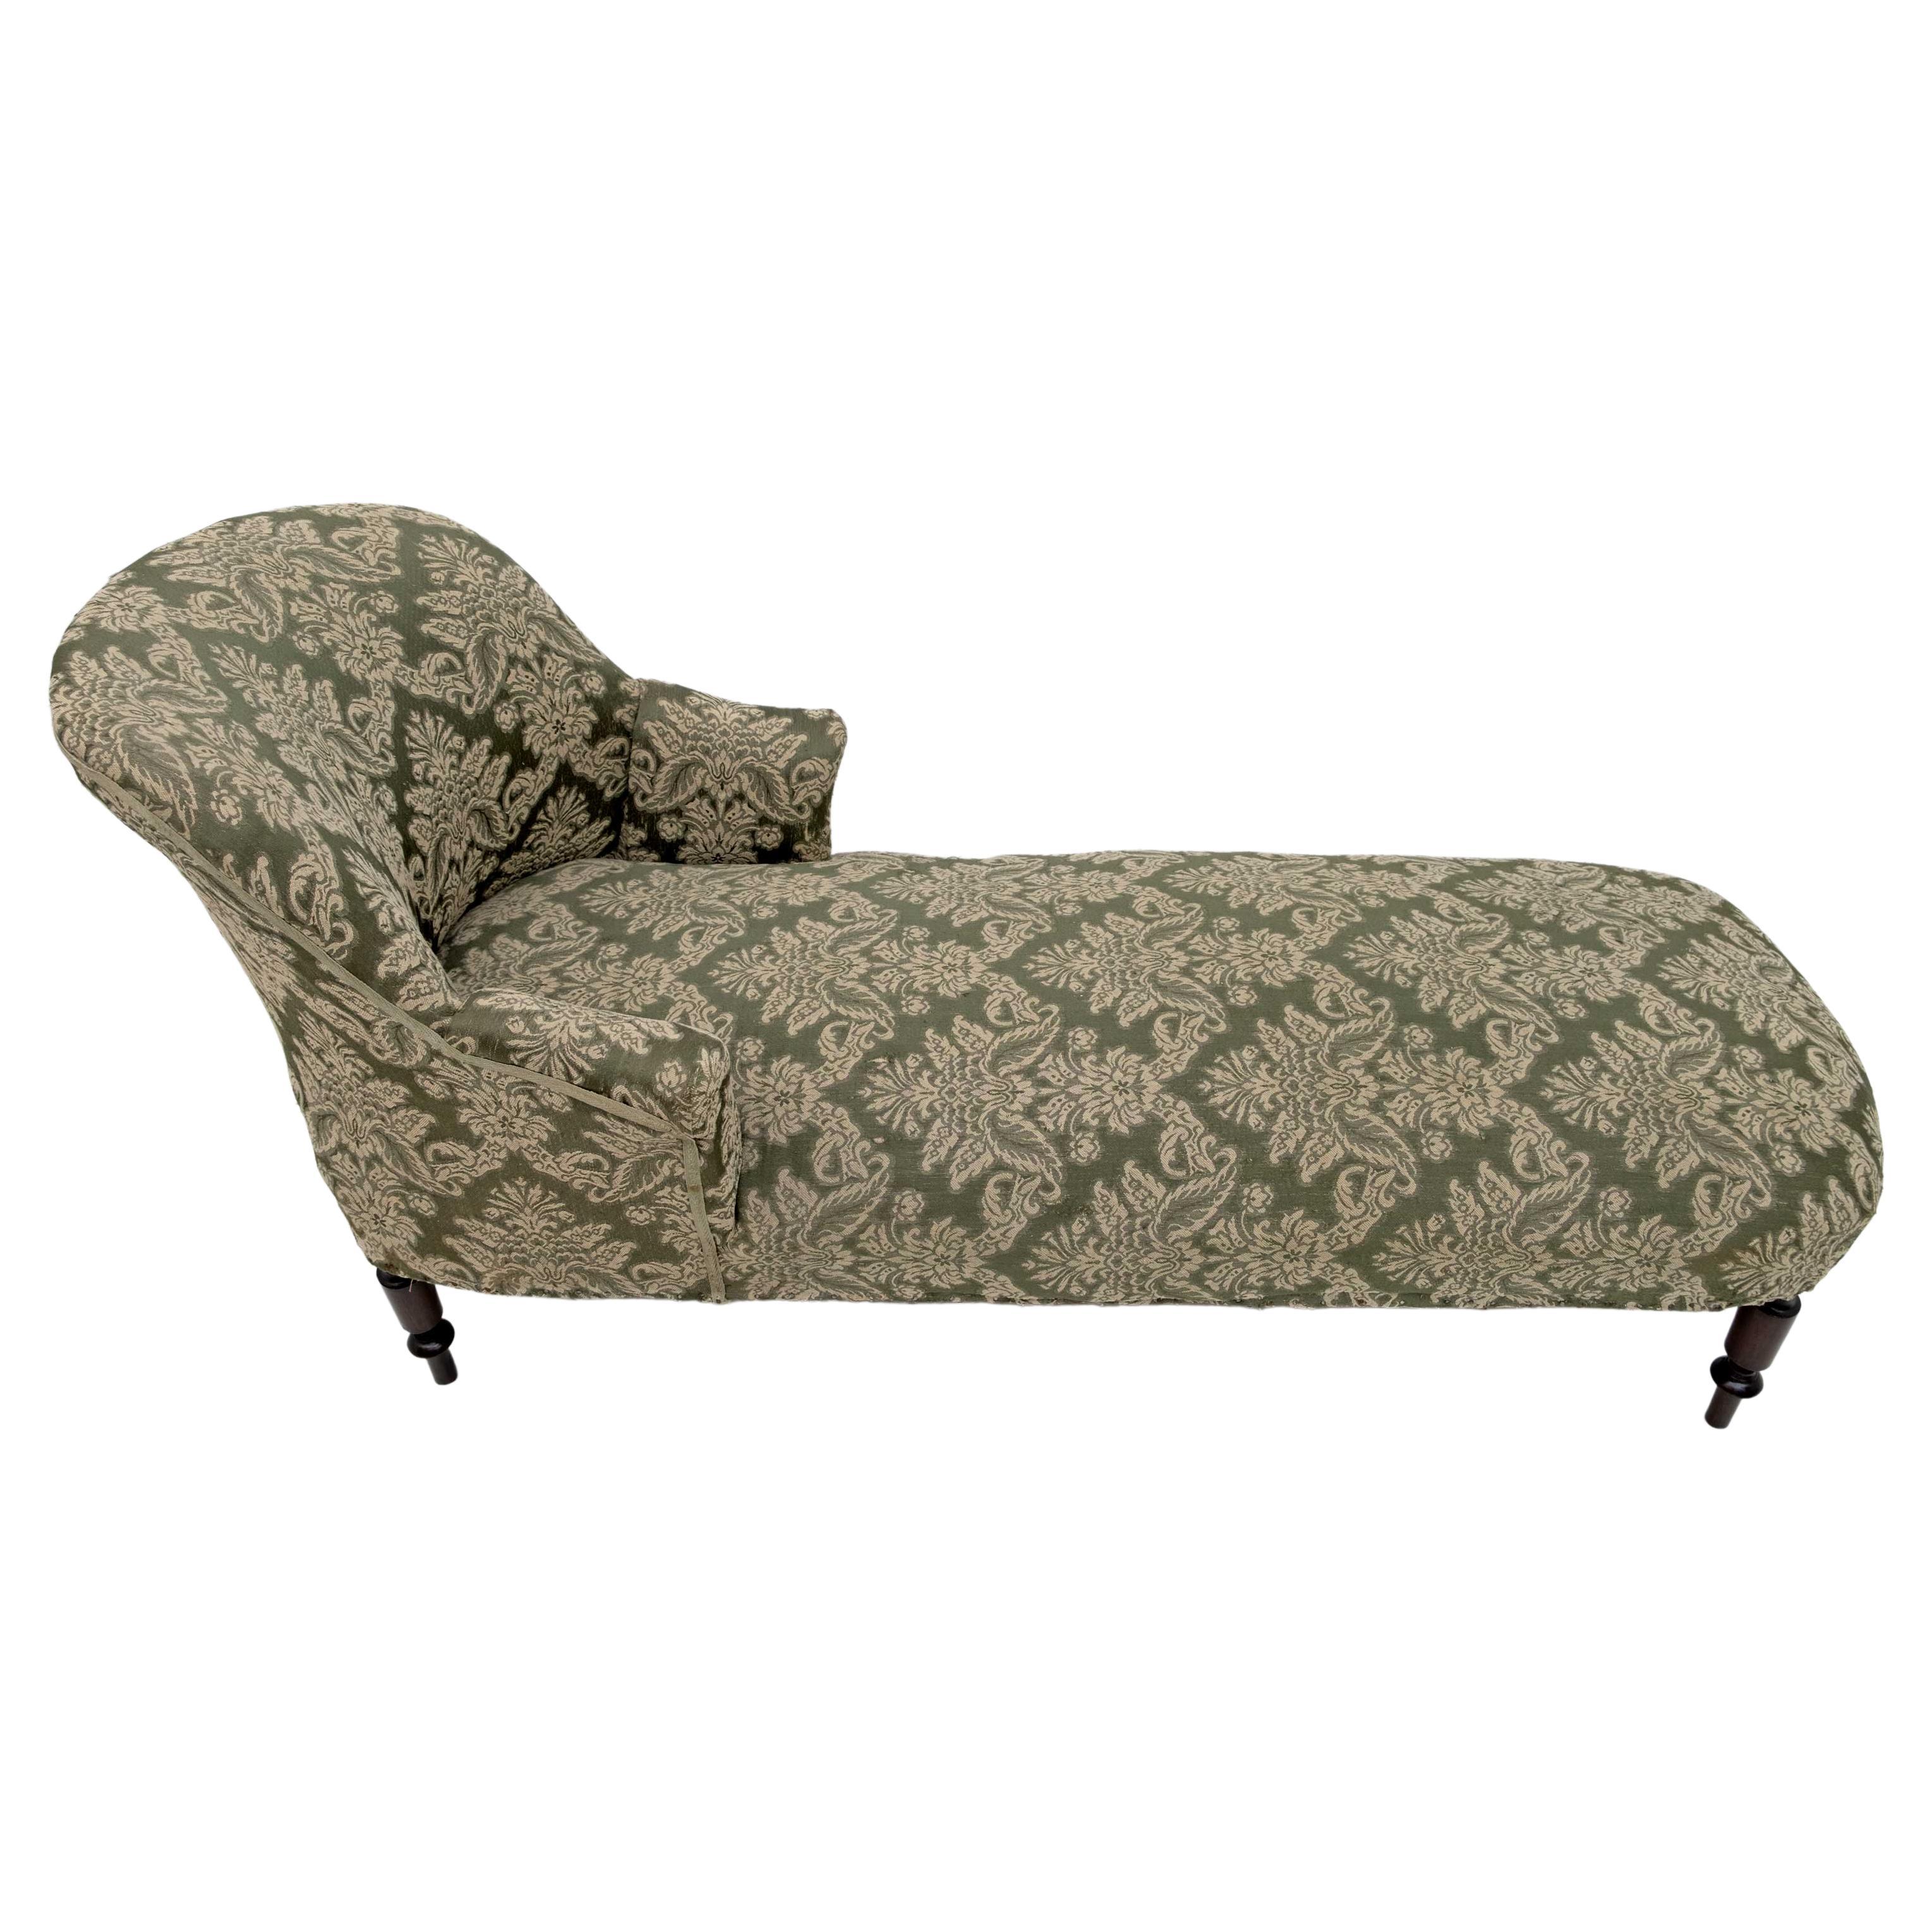 Napoleon III 19th Century French Chaise Longue For Sale